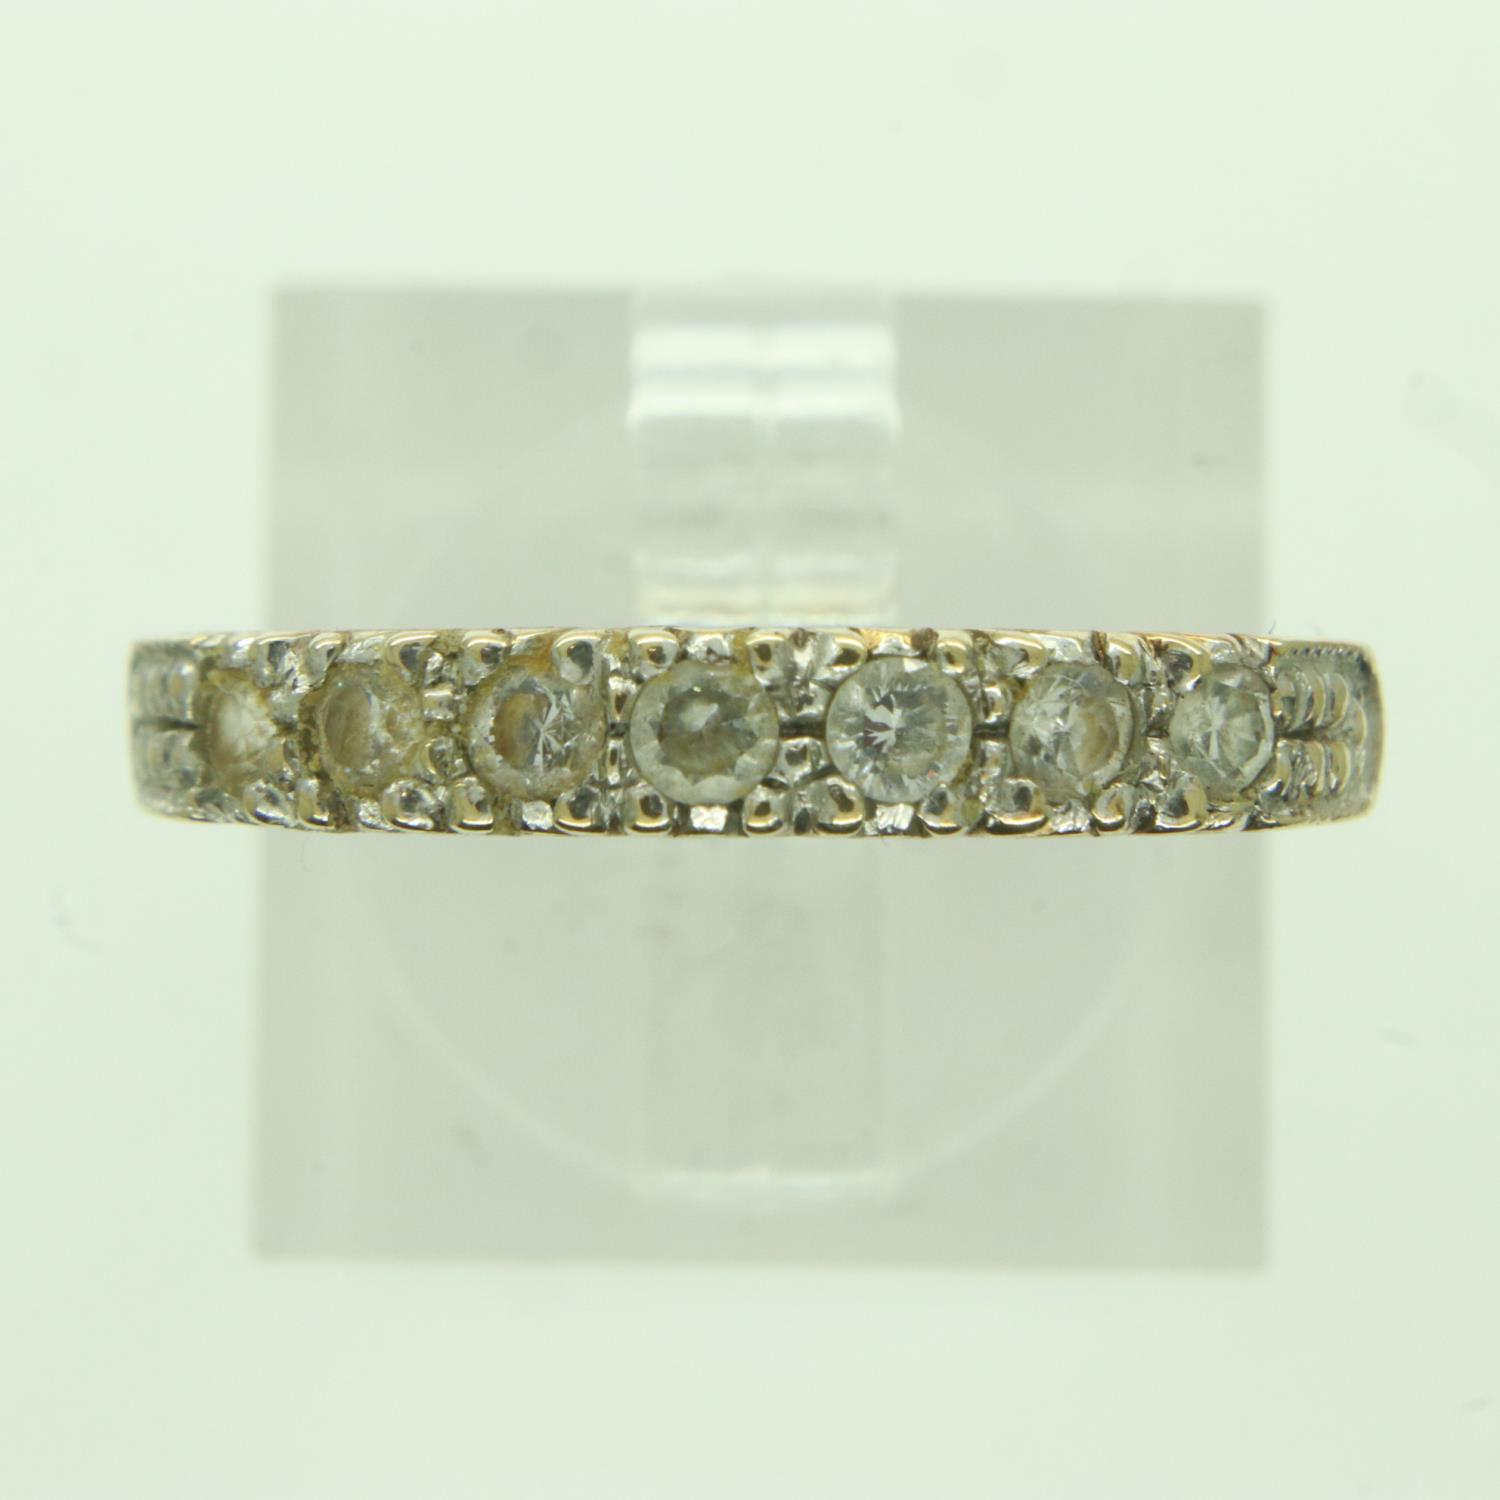 9ct gold ring set with cubic zirconia, size O, 1.7g. UK P&P Group 0 (£6+VAT for the first lot and £